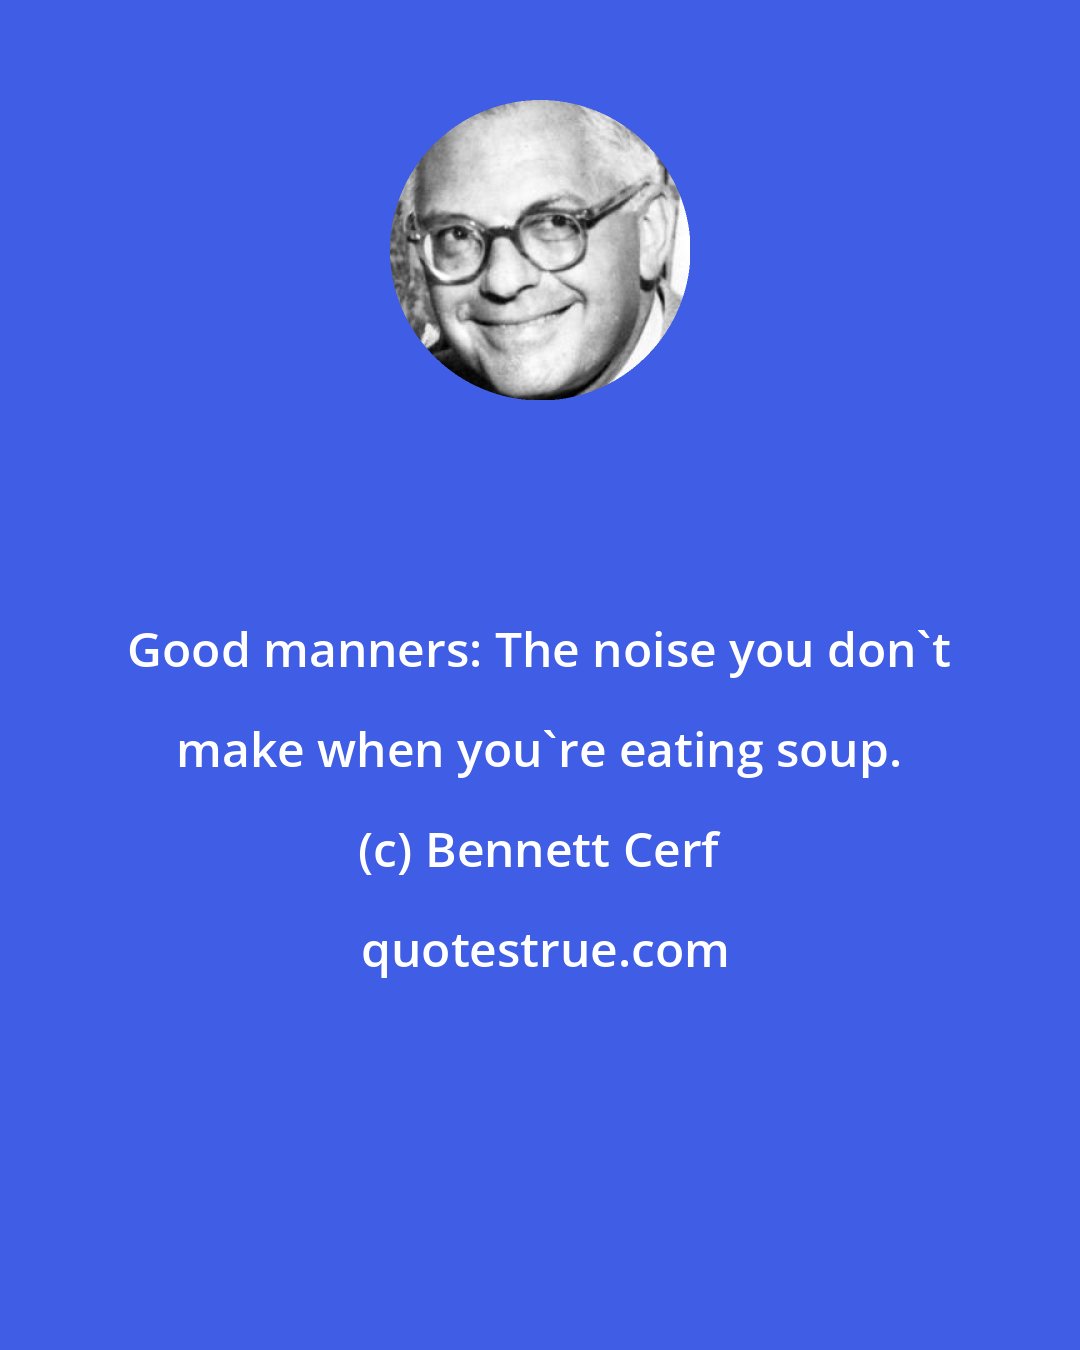 Bennett Cerf: Good manners: The noise you don't make when you're eating soup.